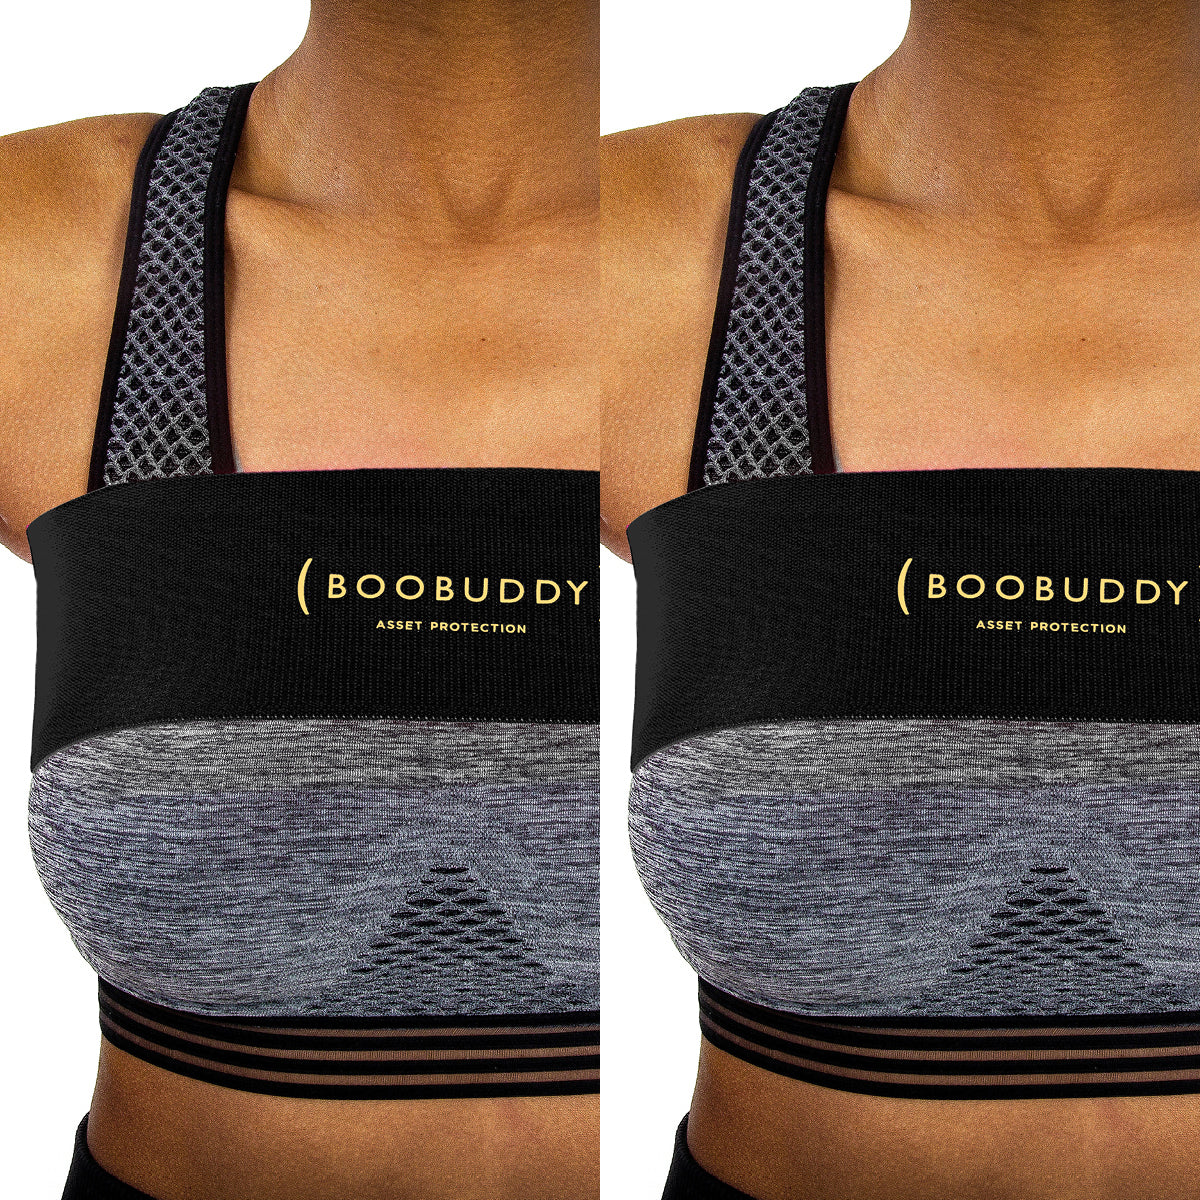 Boobuddy Adjustable Breast Support Band | Black Twin Pack | How to Wear a Boobuddy